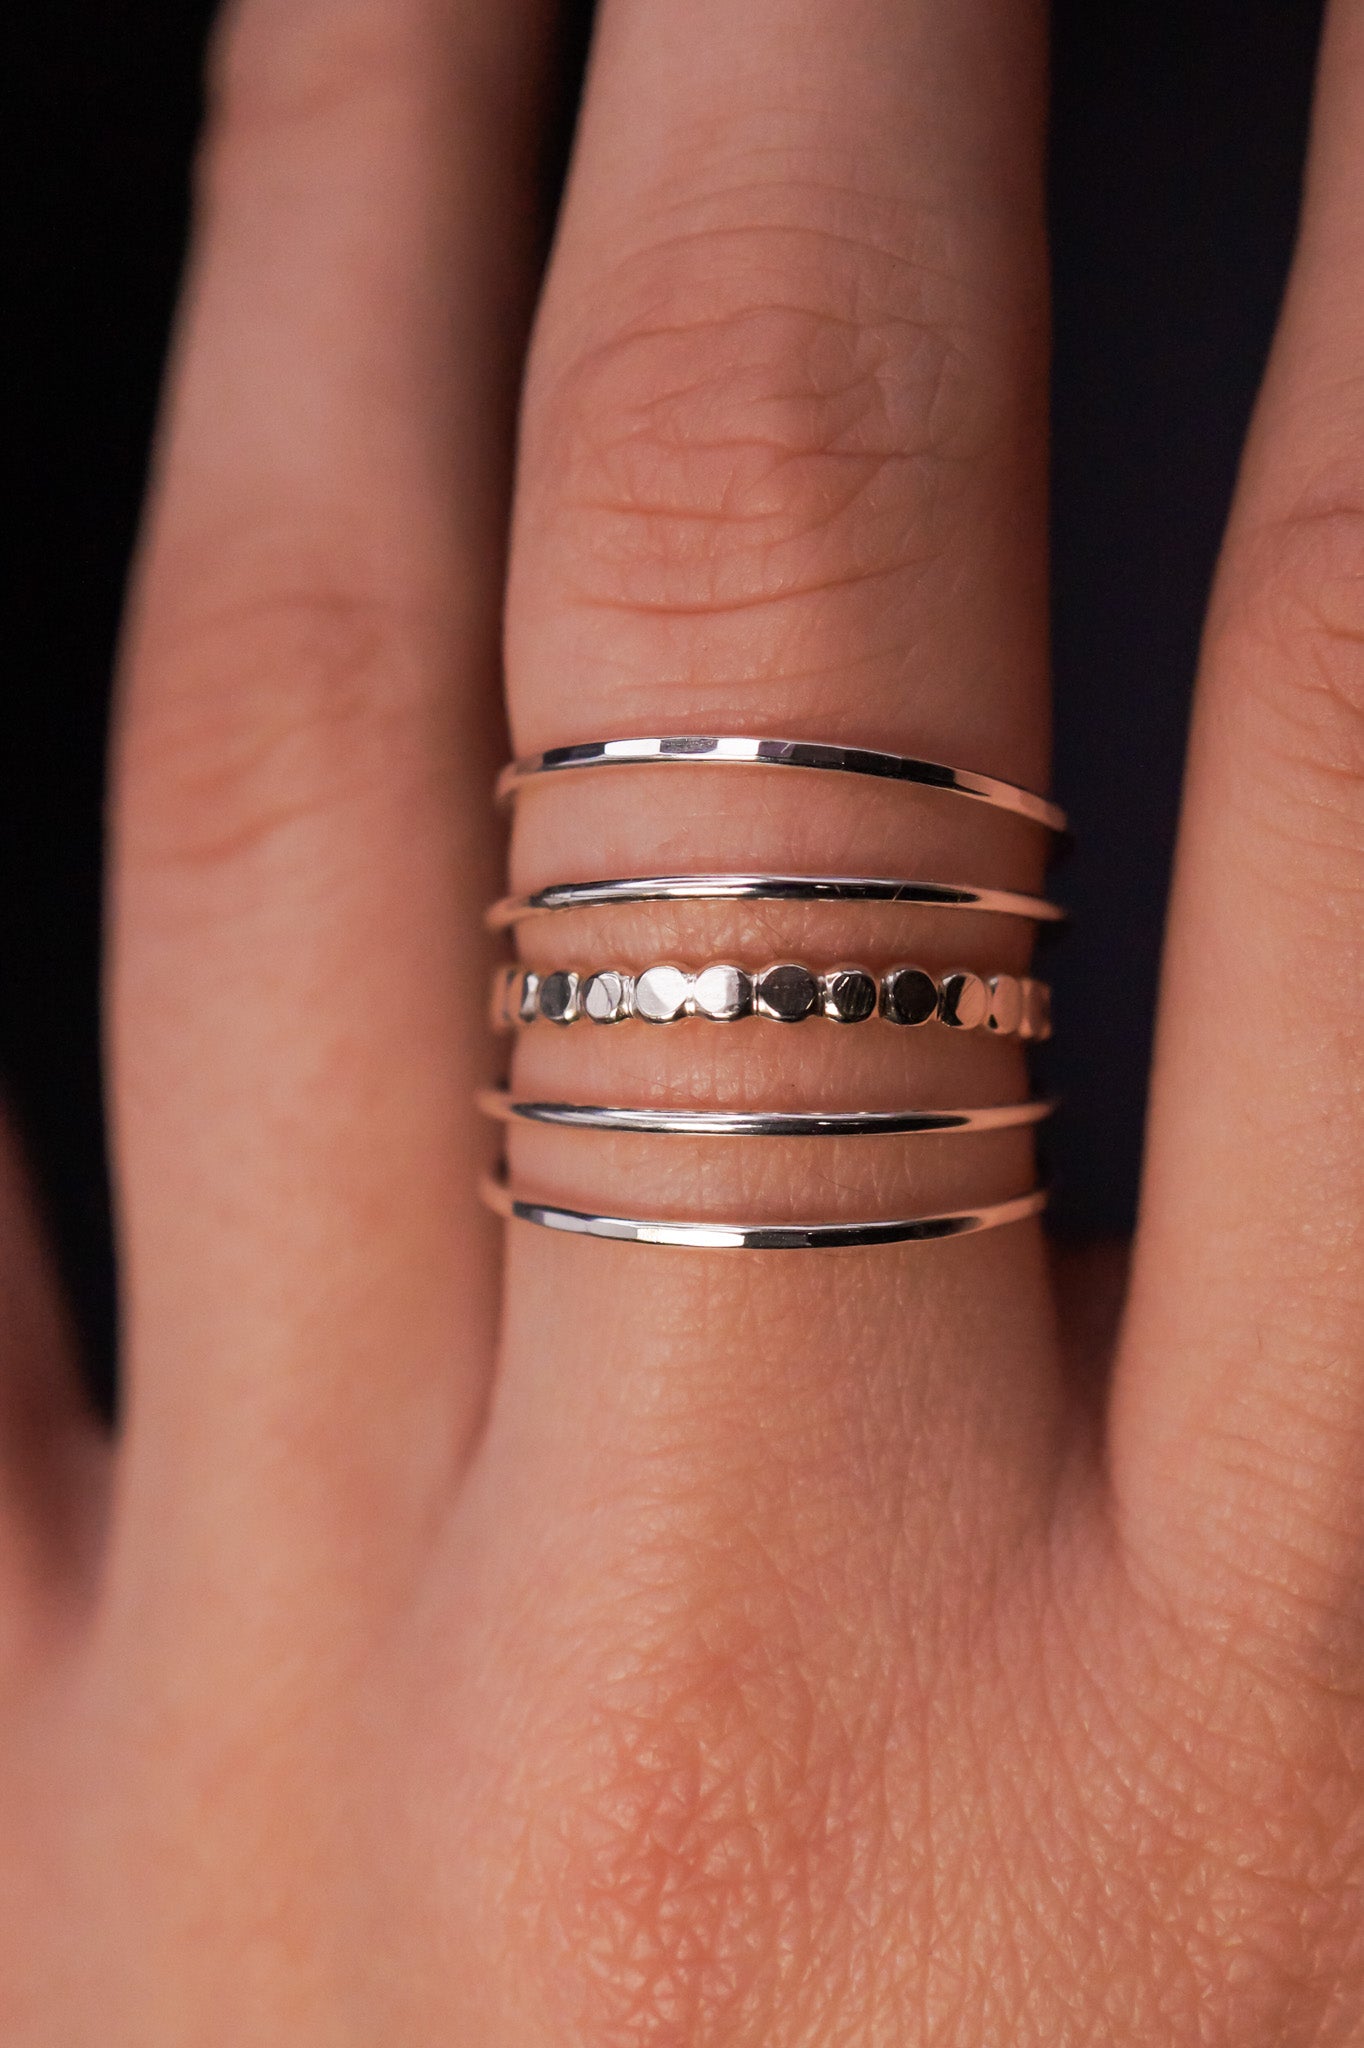 The Classic Mini Bead Set of 5 Stacking Rings, Gold Fill, Rose Gold Fill or Sterling Silver